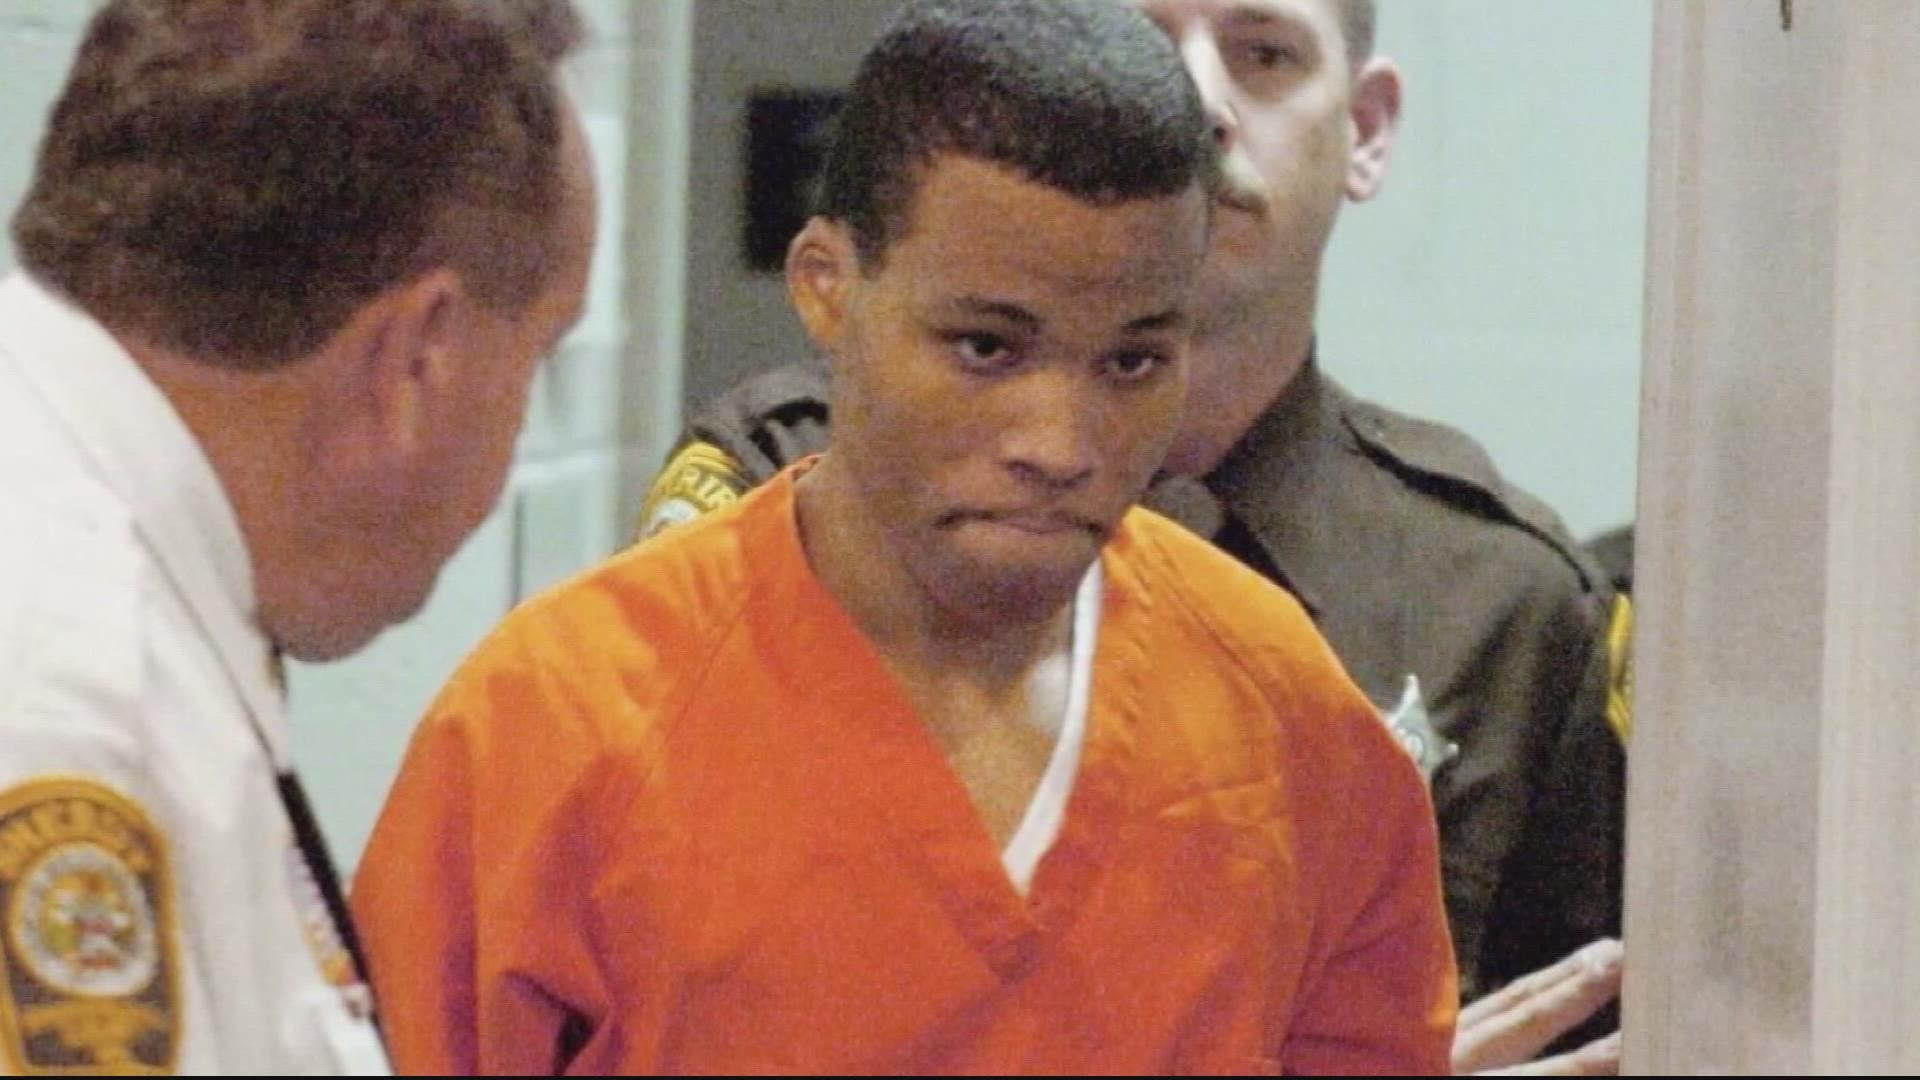 Lee Boyd Malvo is expected to be resentenced for his role in the sniper attacks 20 years ago. Here's why.